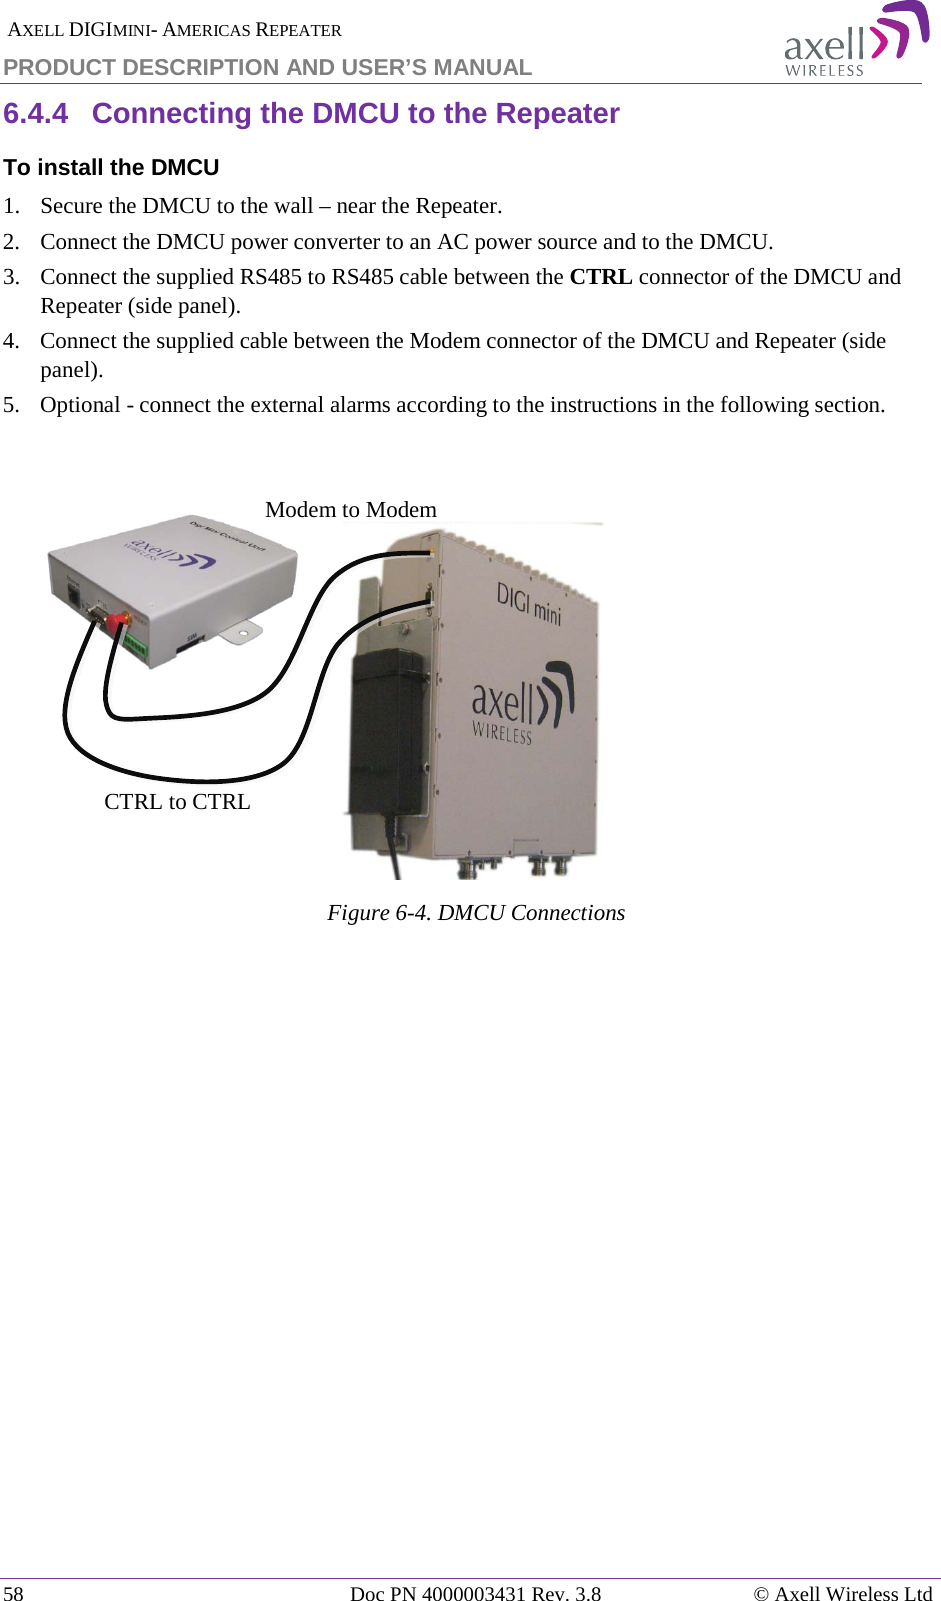  AXELL DIGIMINI- AMERICAS REPEATER PRODUCT DESCRIPTION AND USER’S MANUAL 58   Doc PN 4000003431 Rev. 3.8 © Axell Wireless Ltd 6.4.4  Connecting the DMCU to the Repeater To install the DMCU 1.  Secure the DMCU to the wall – near the Repeater. 2.  Connect the DMCU power converter to an AC power source and to the DMCU.  3.  Connect the supplied RS485 to RS485 cable between the CTRL connector of the DMCU and Repeater (side panel). 4.  Connect the supplied cable between the Modem connector of the DMCU and Repeater (side panel). 5.  Optional - connect the external alarms according to the instructions in the following section.     Figure  6-4. DMCU Connections   Modem to Modem CTRL to CTRL 